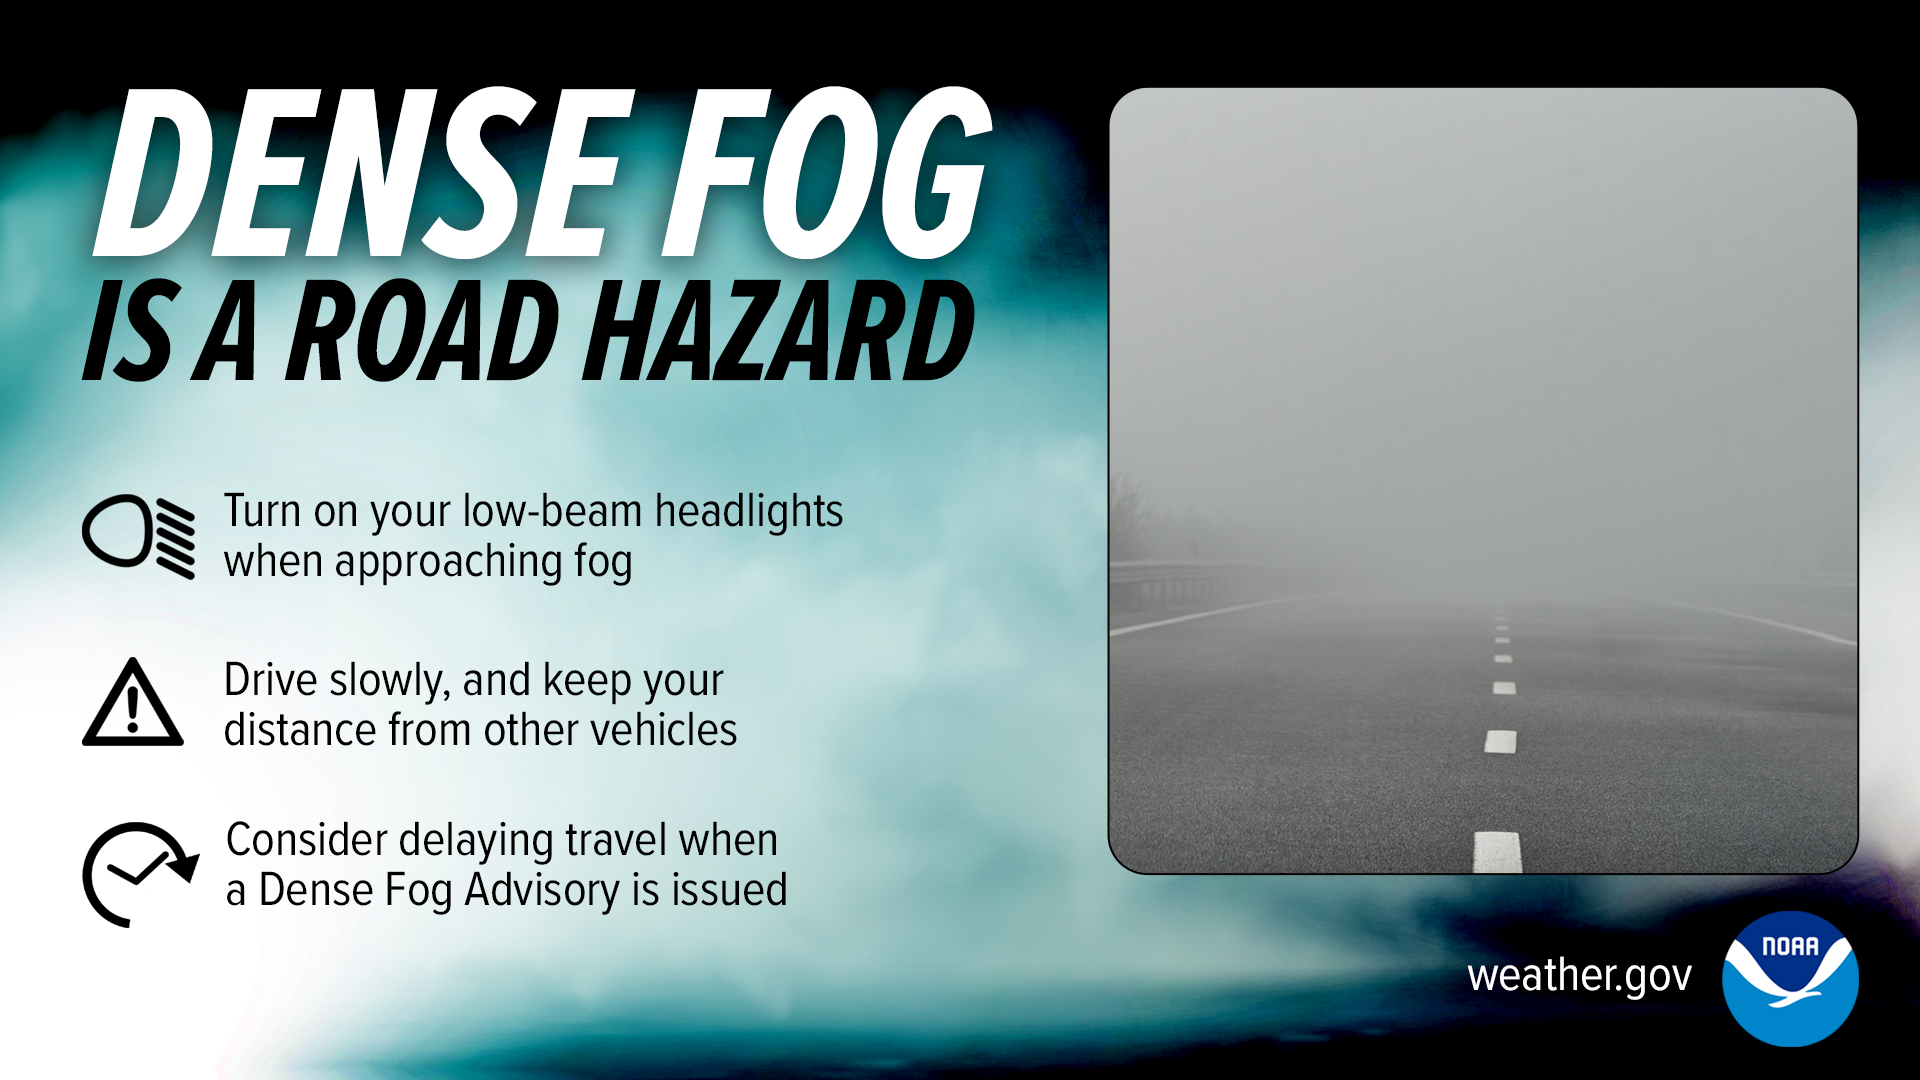 Dense fog is a road hazard:
Turn on your low-beam headlights when approaching fog.
Drive slowly, and keep your distance from other vehicles.
Consider delaying travel when a Dense Fog Advisory is issued.